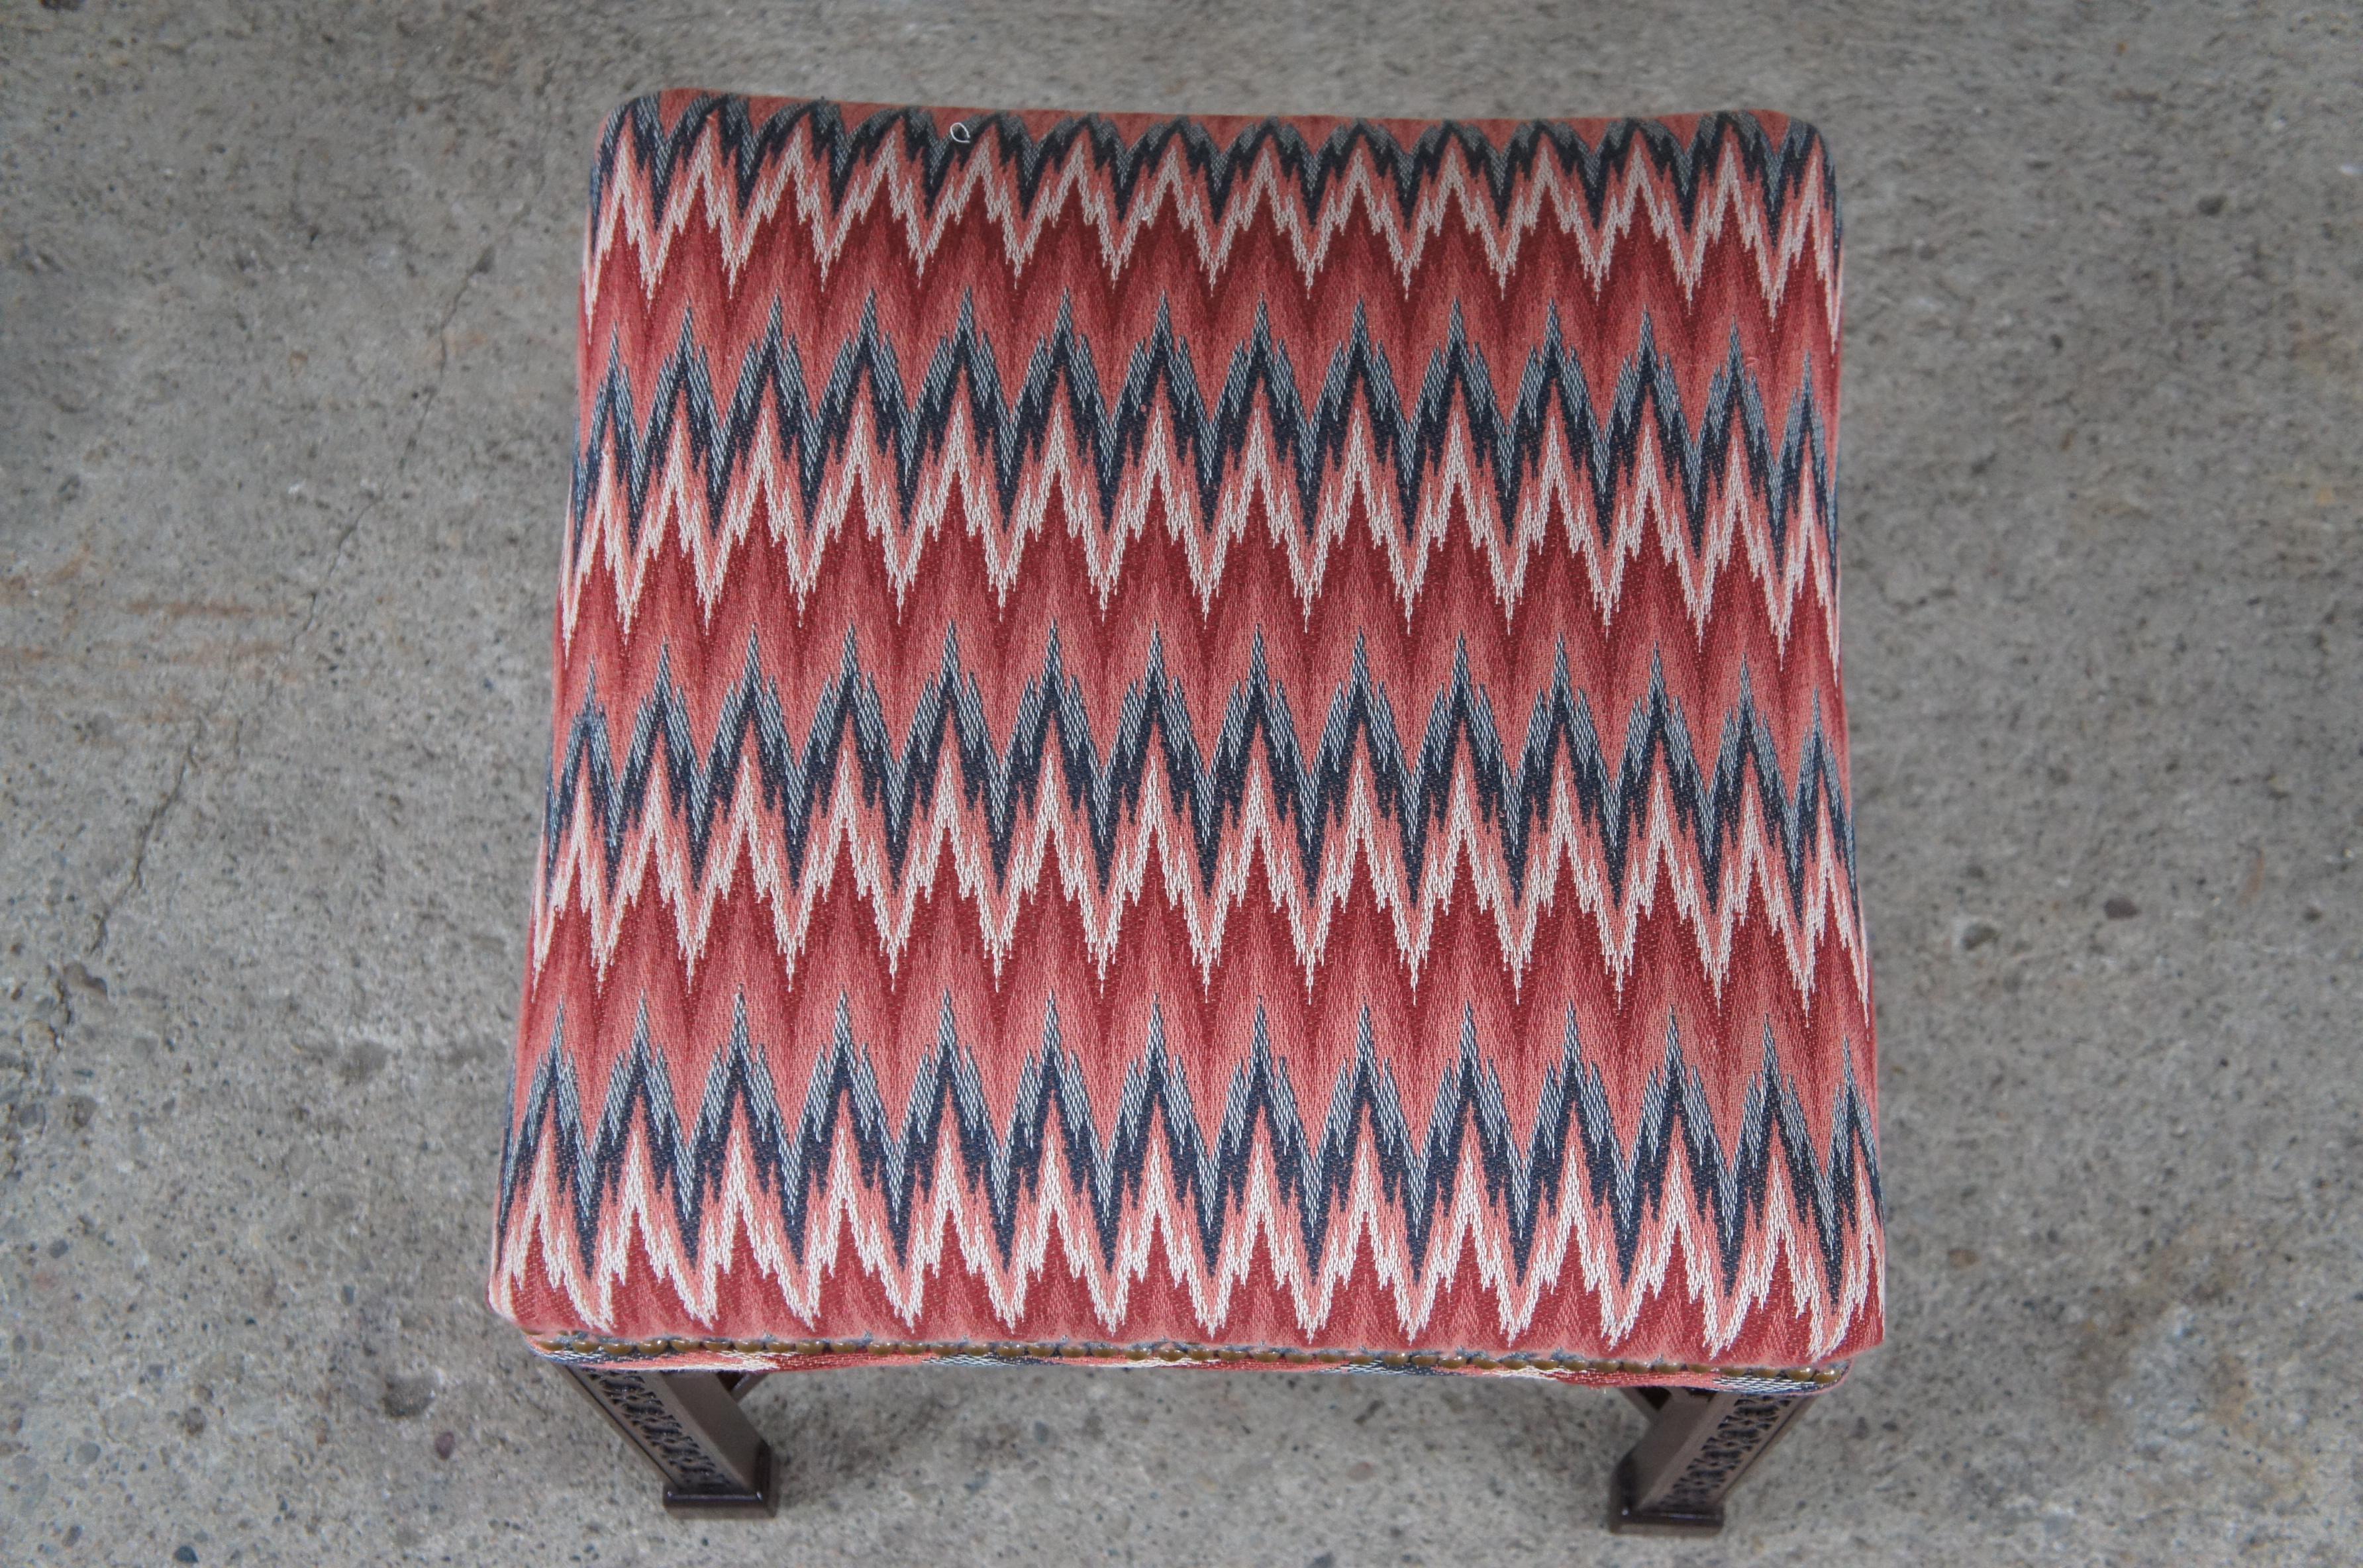 20th Century Hickory Chair Chinese Chippendale Mahogany Foot Stool Chevron Fabric Ottoman